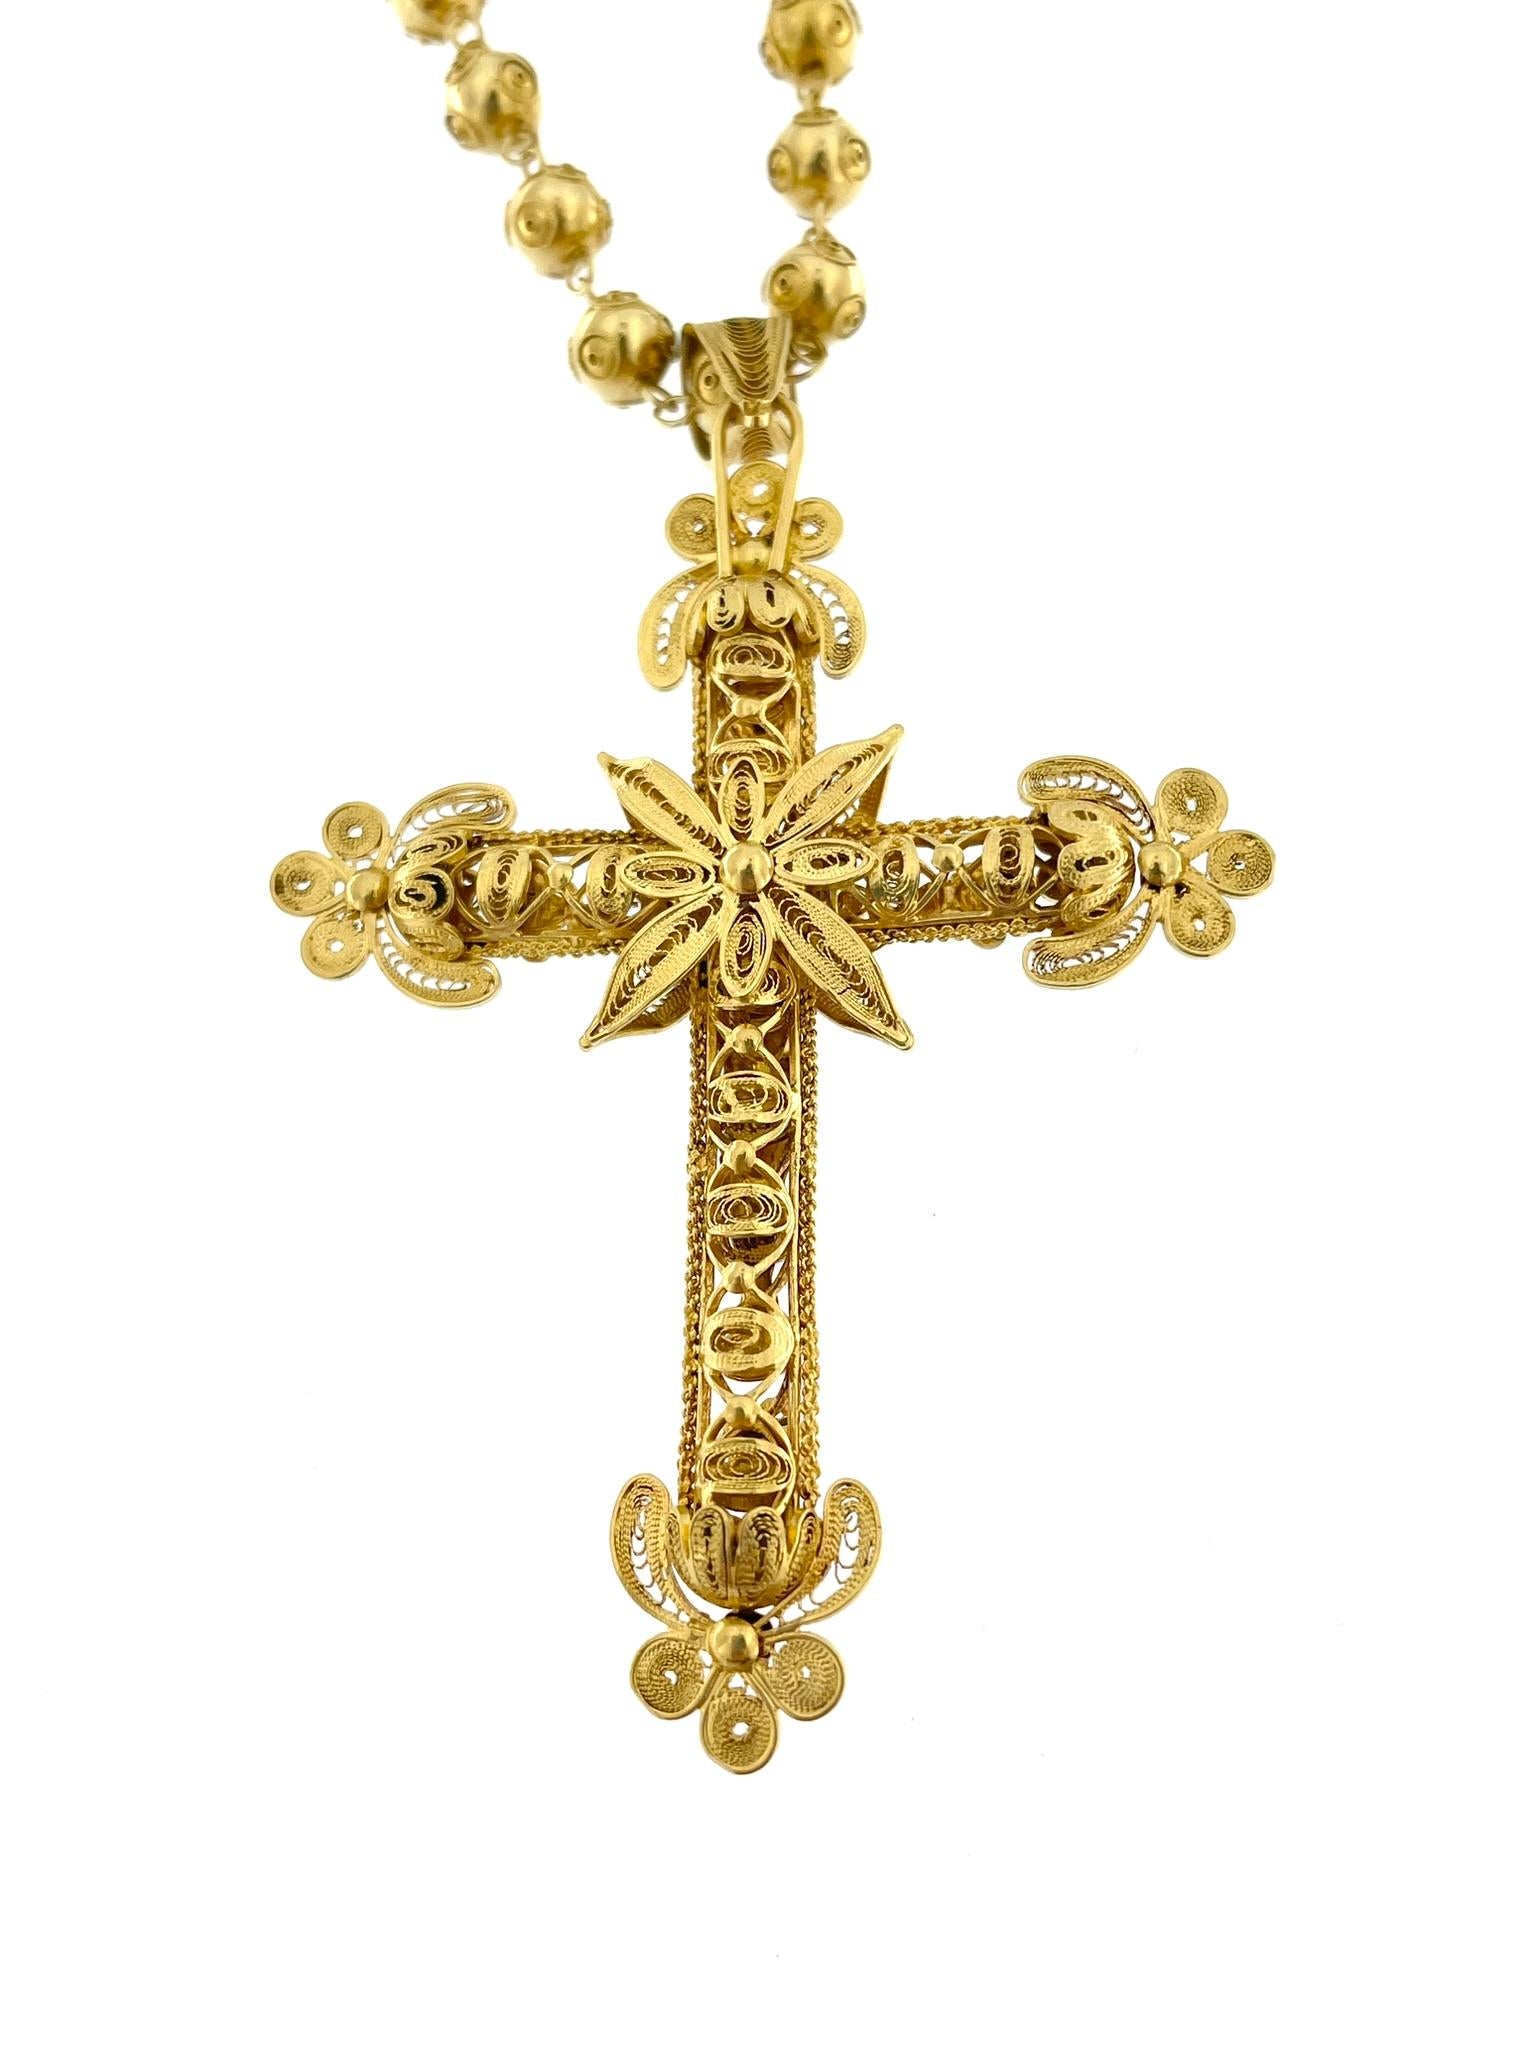 Traditional Hand-Made Portuguese Crucifix with Chain 19 karat Yellow Gold For Sale 2